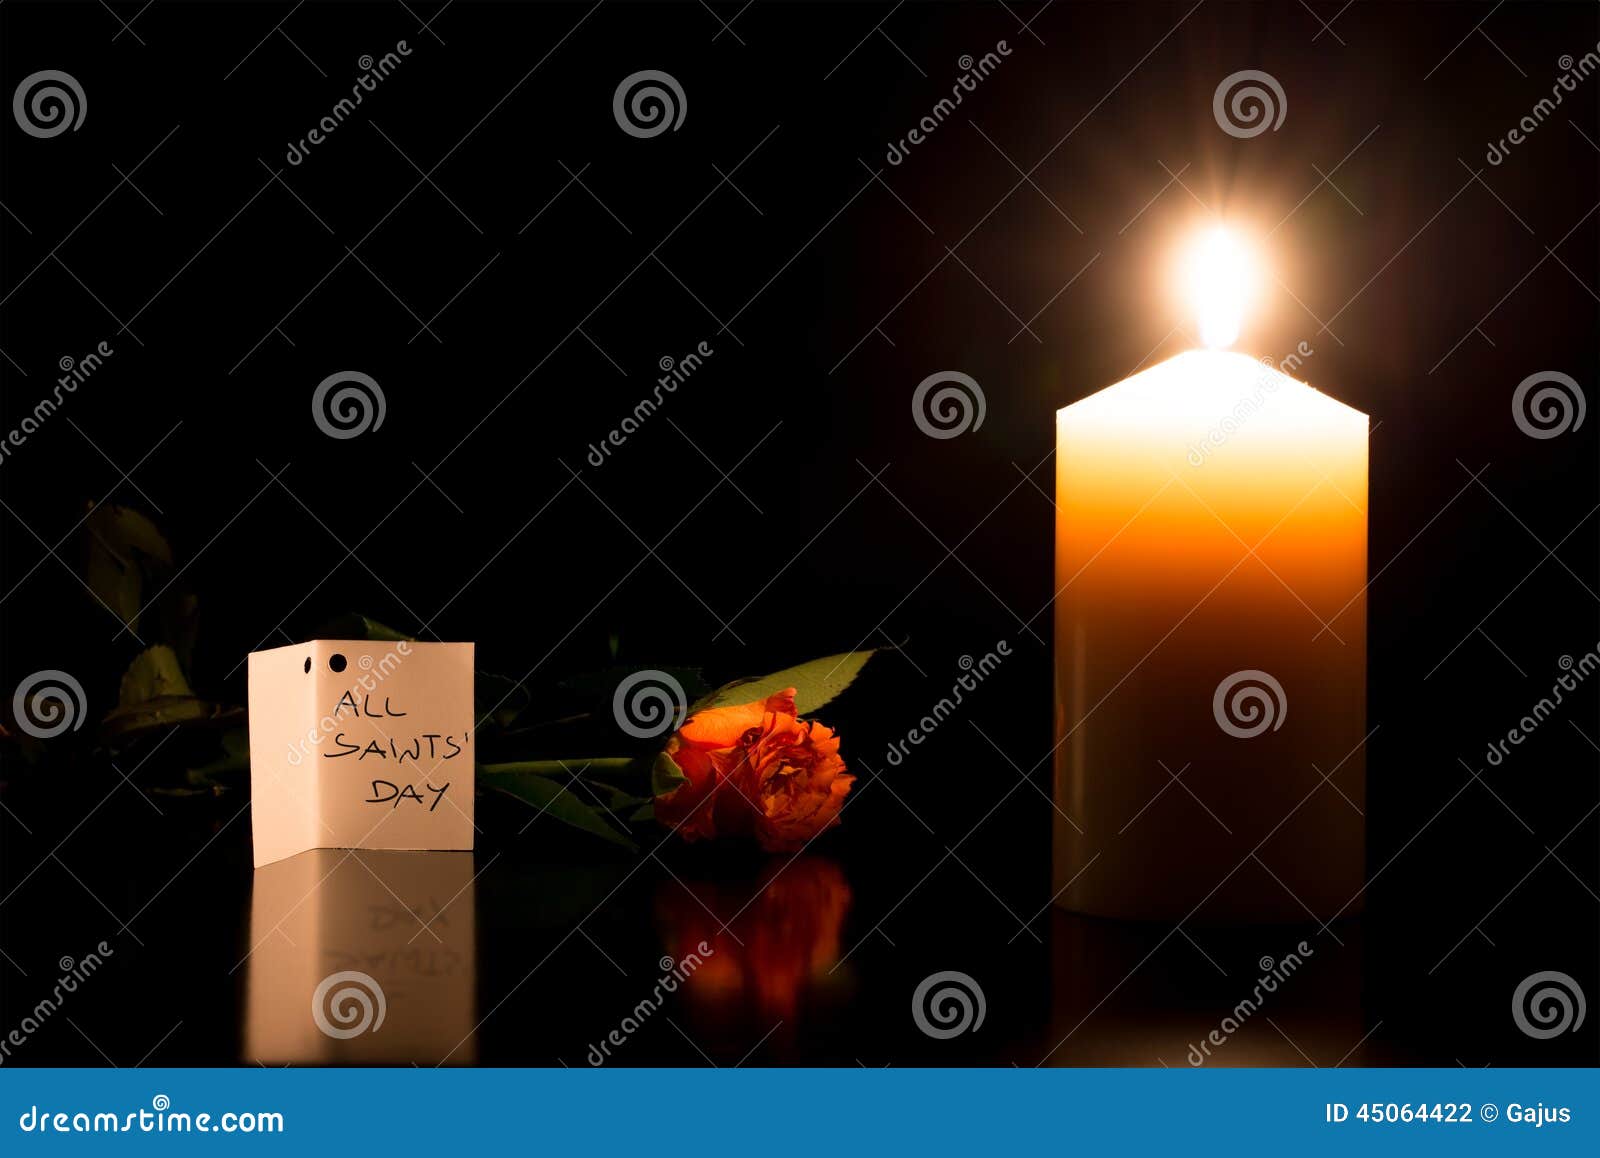 candle in the darkness during all saints day